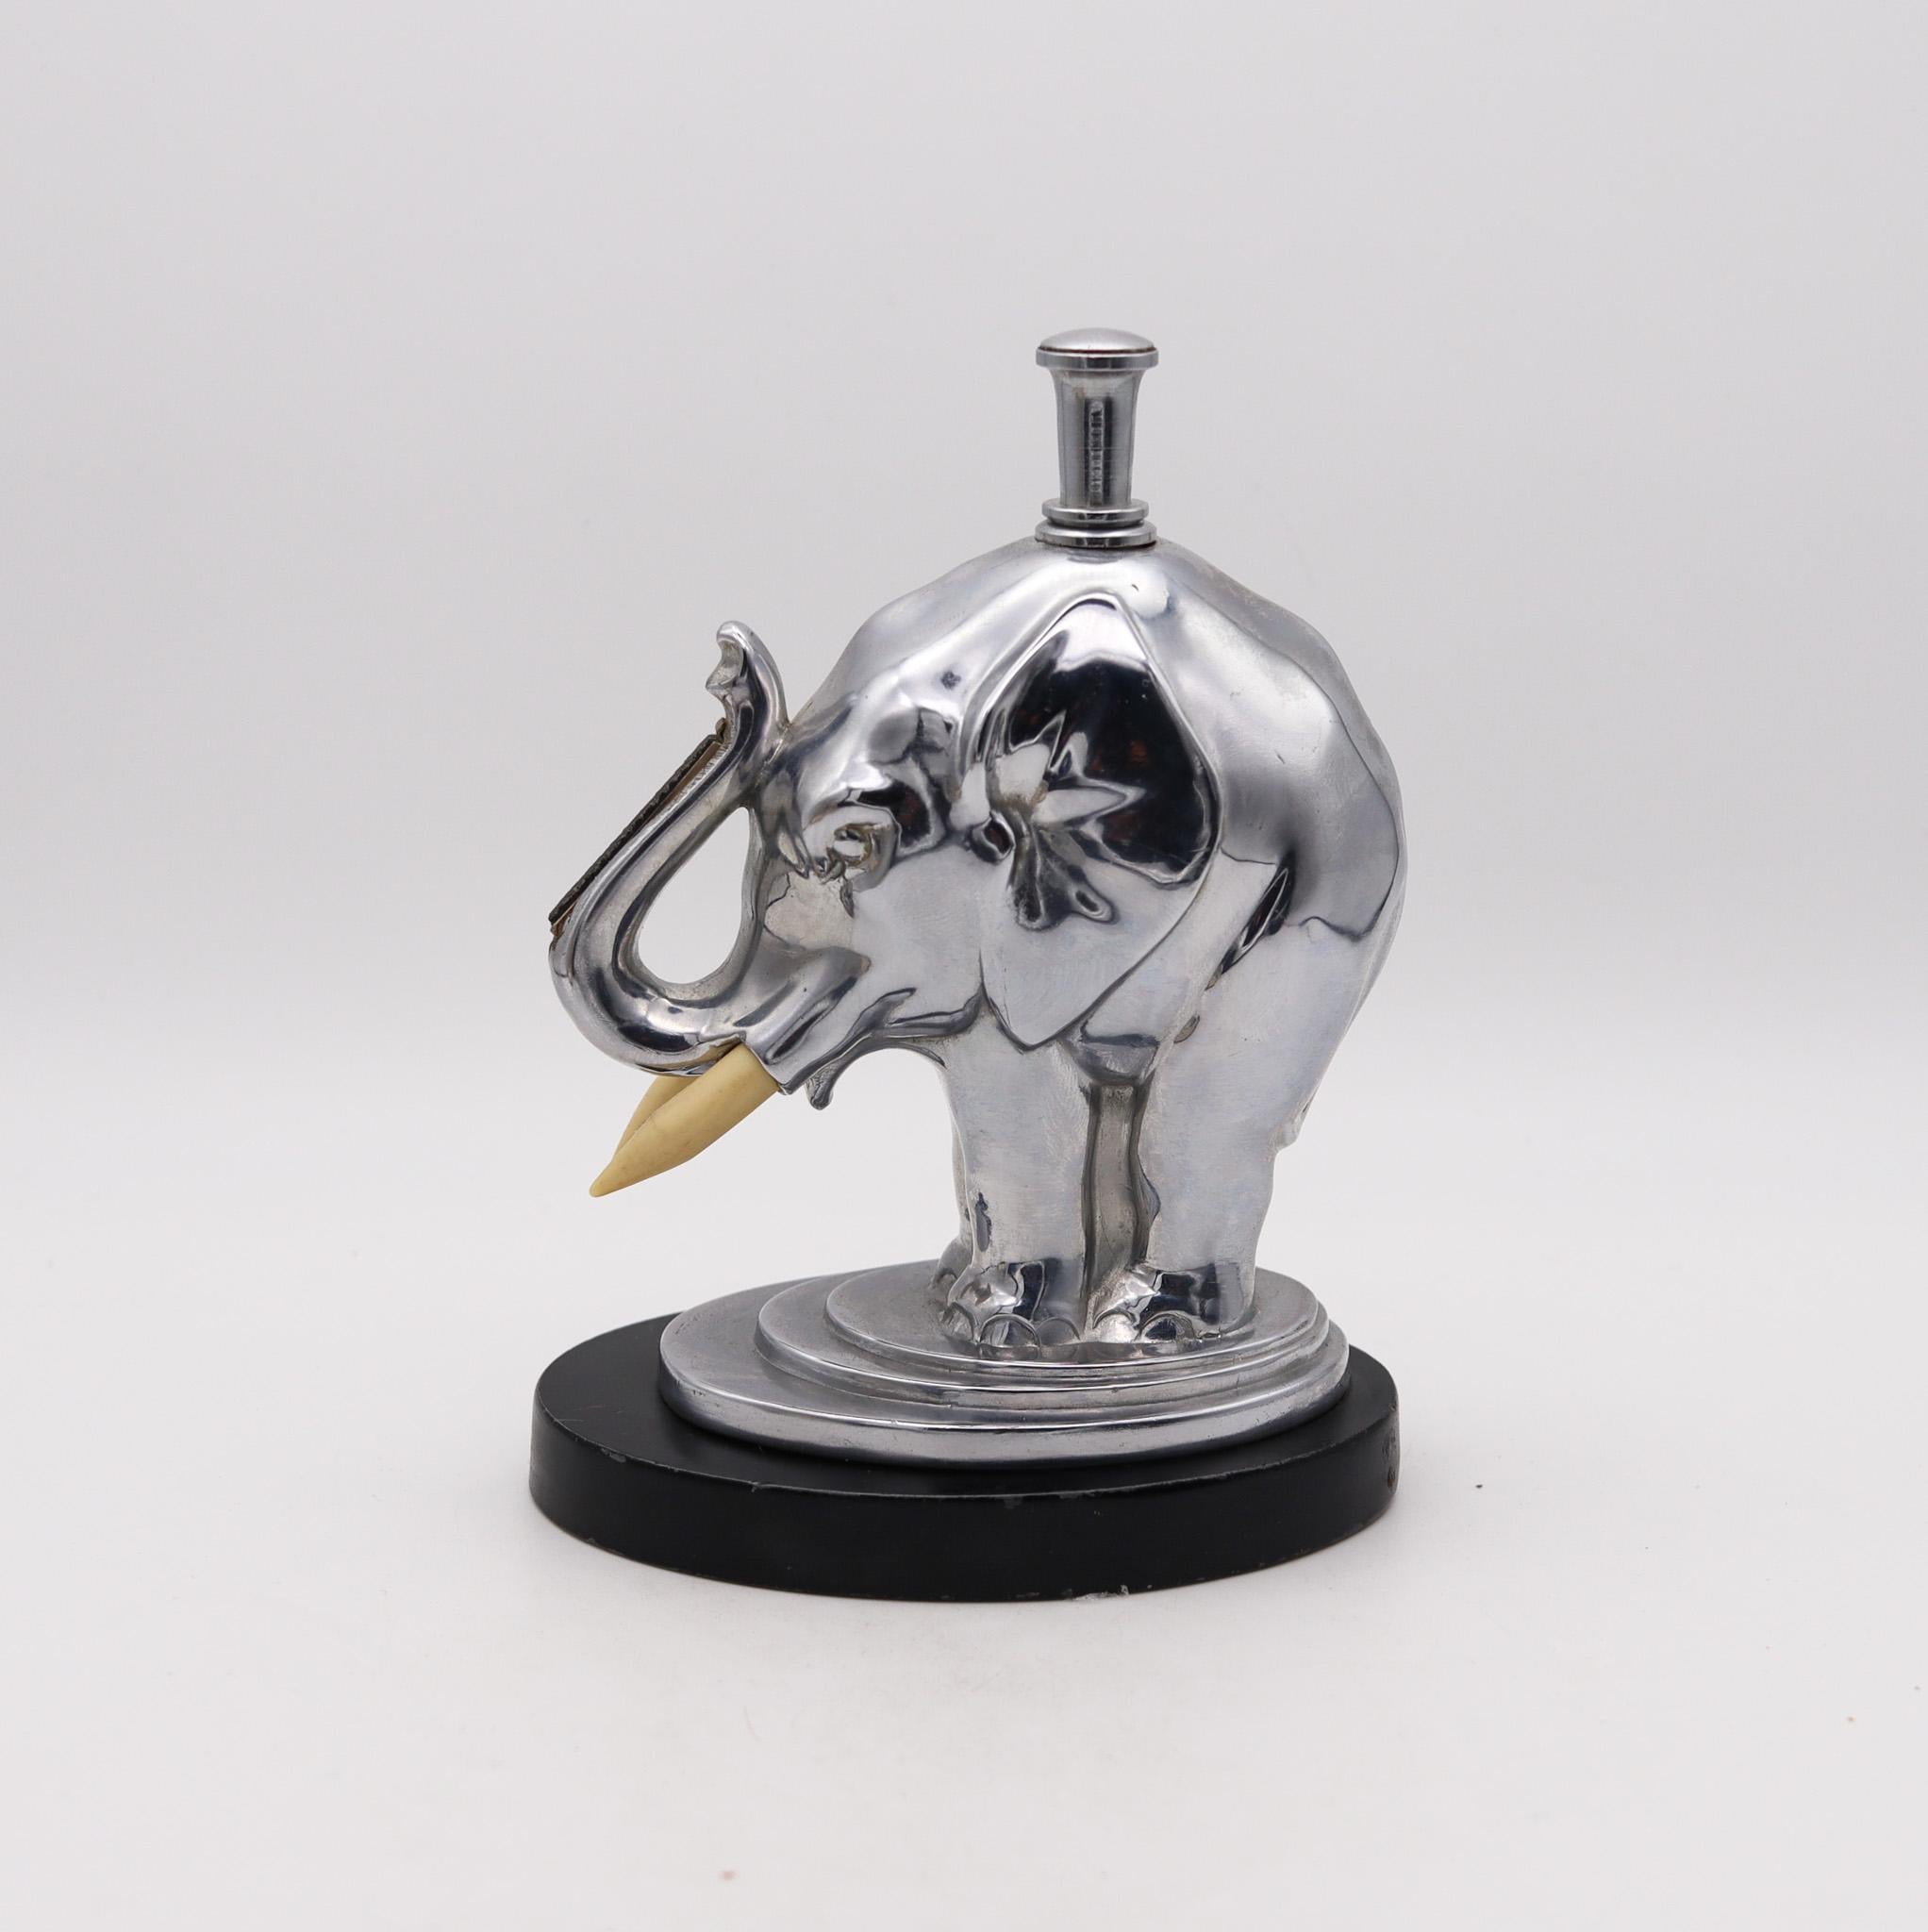 Desk elephant Striker Lighter designed by Ronson.

The striker lighters made by Ronson are famous under collectors. This extremely rare desk Striker Lighter was created in New Jersey United States by The Art Metal Works for The Ronson Co. during the